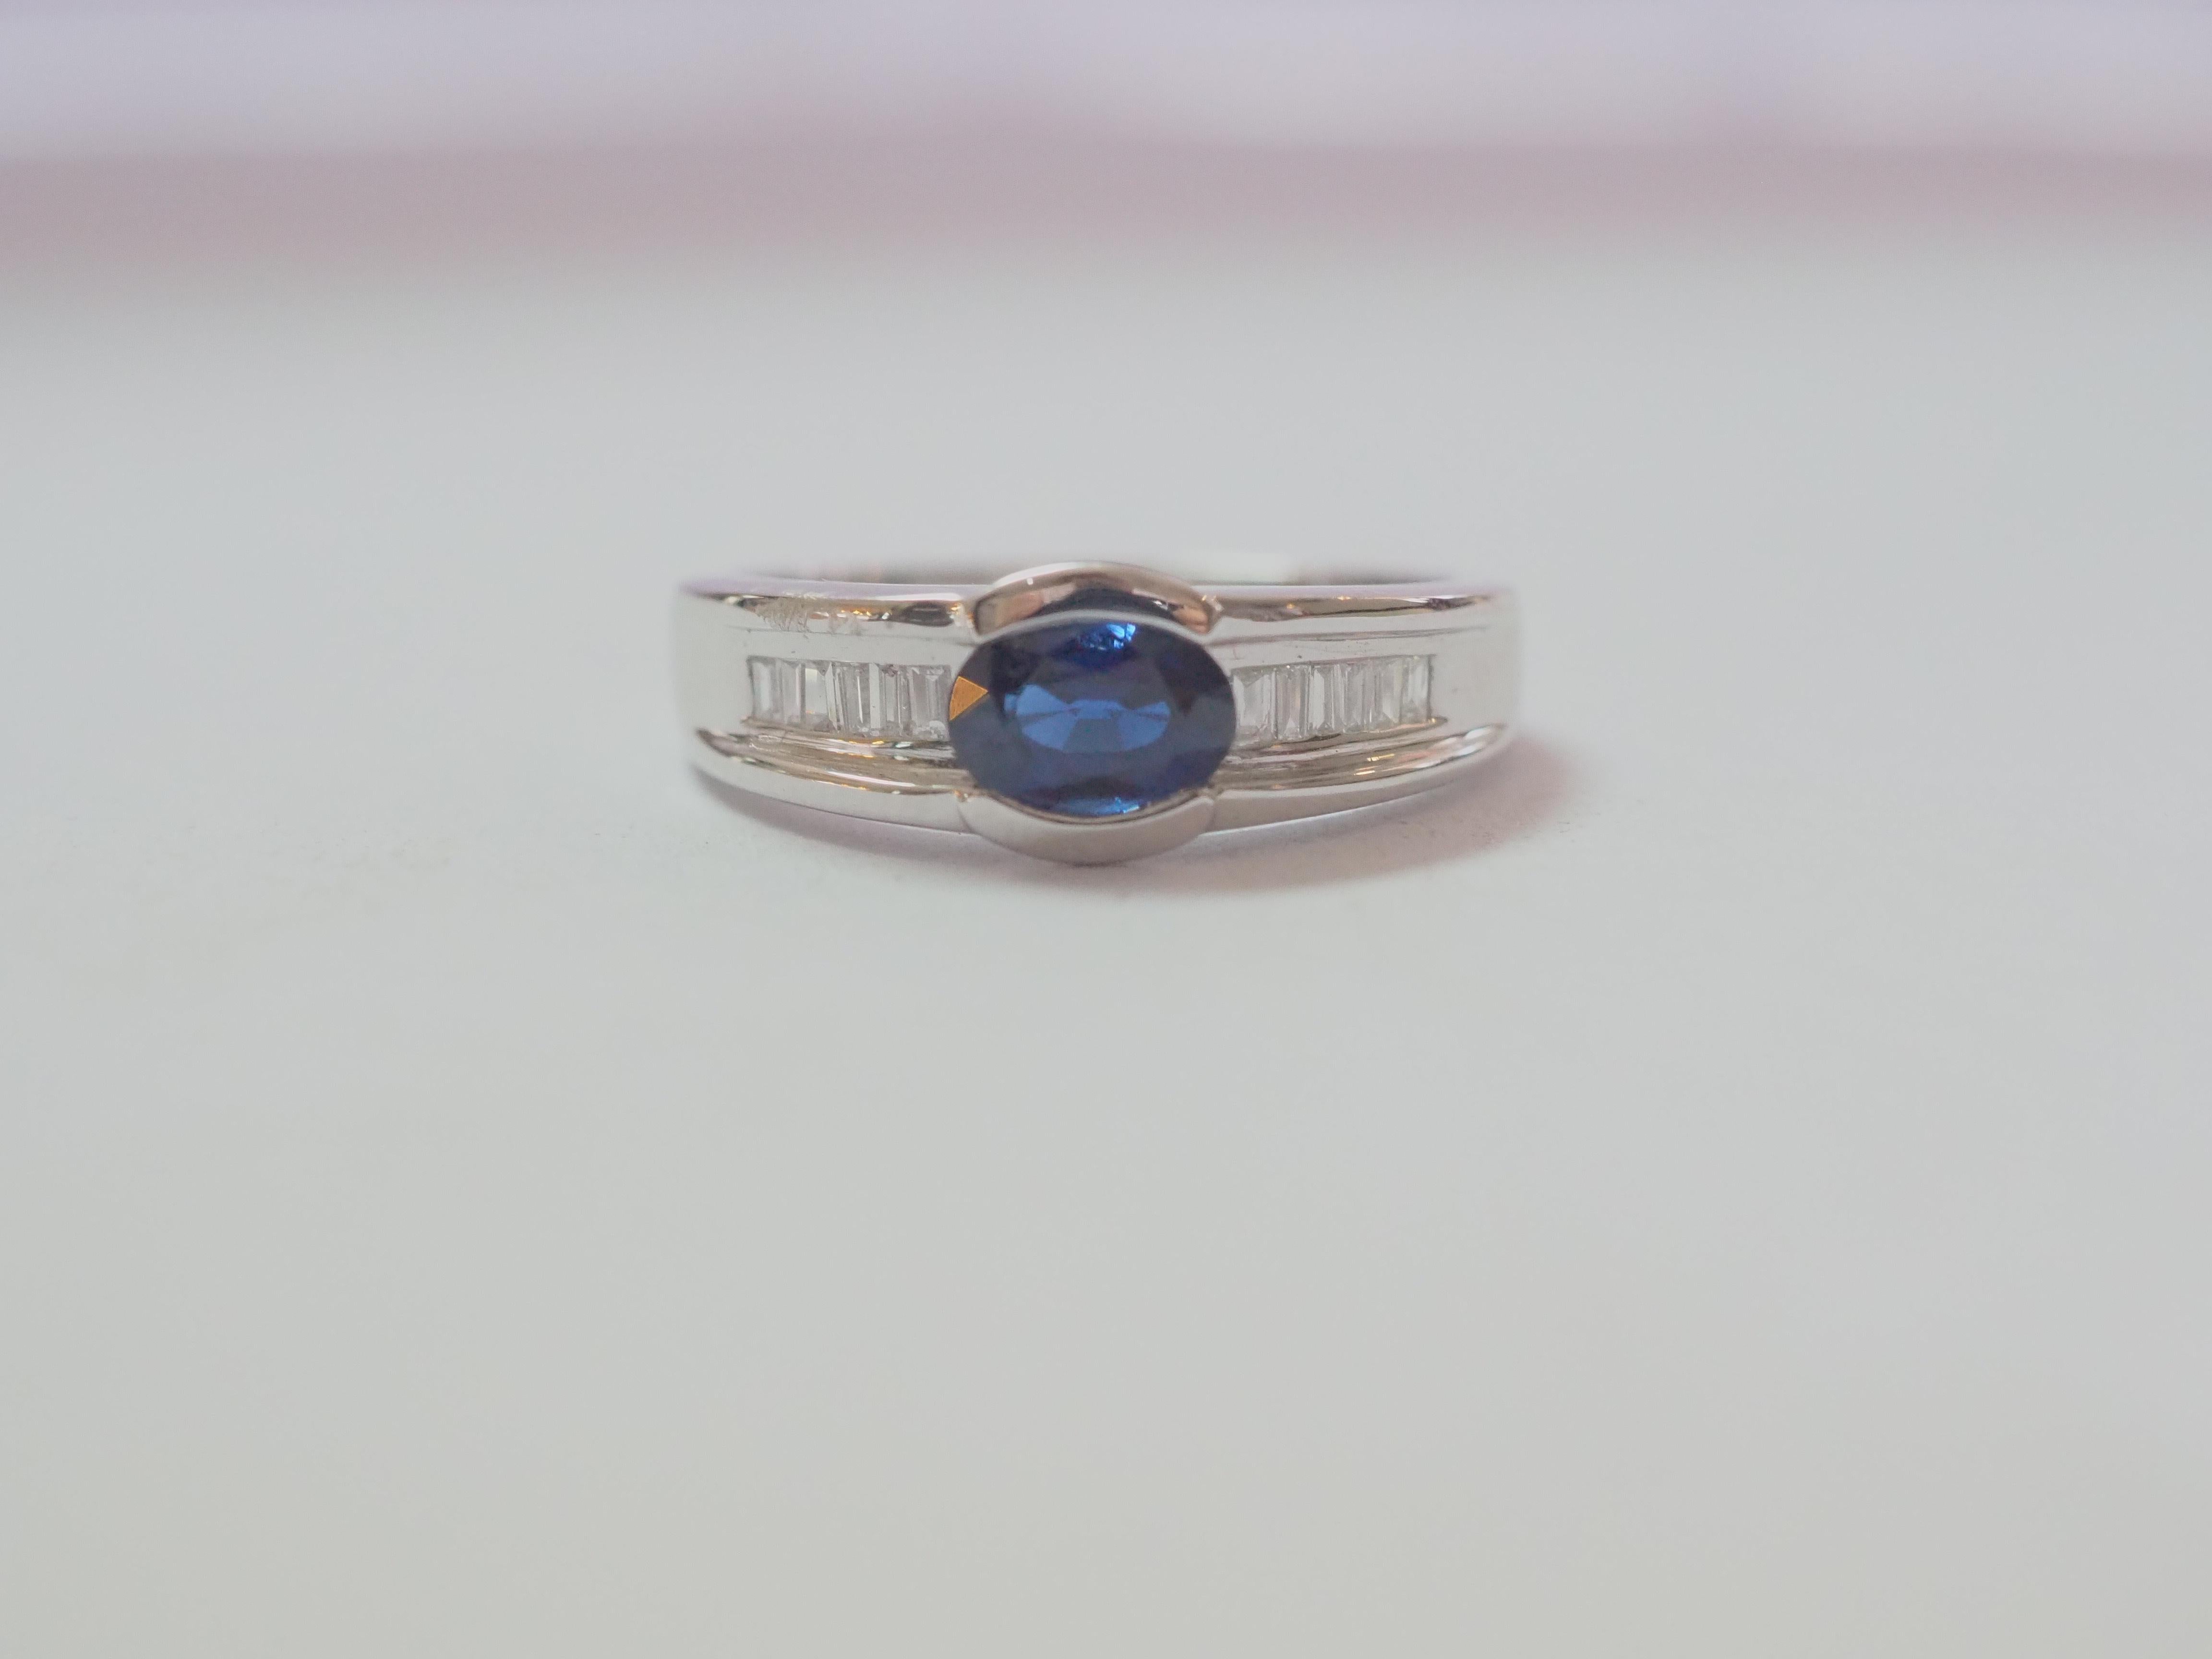 Auction Estimate:
$750-$2,000

This beautiful unisex band ring boasts a very stunning and eye clean blue sapphire! The sapphire is an east-meets-west oval cut and is very clear with dark tone of nice blue color. There are 12 baguette cut diamonds on